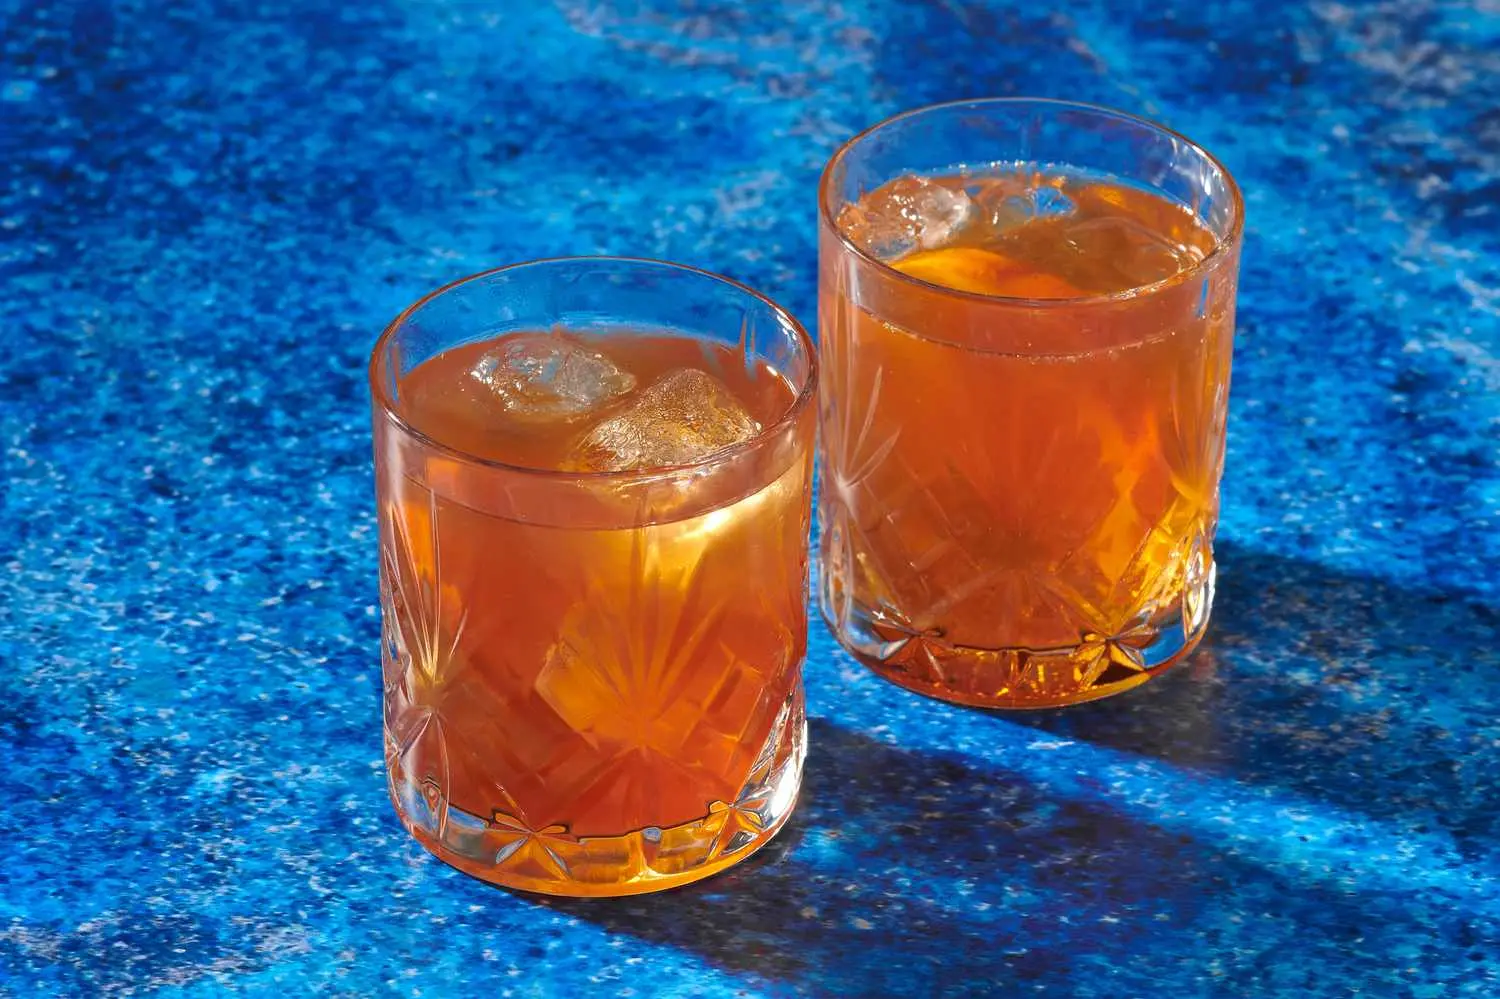 smoked maple syrup cocktail - Is maple syrup good for cocktails